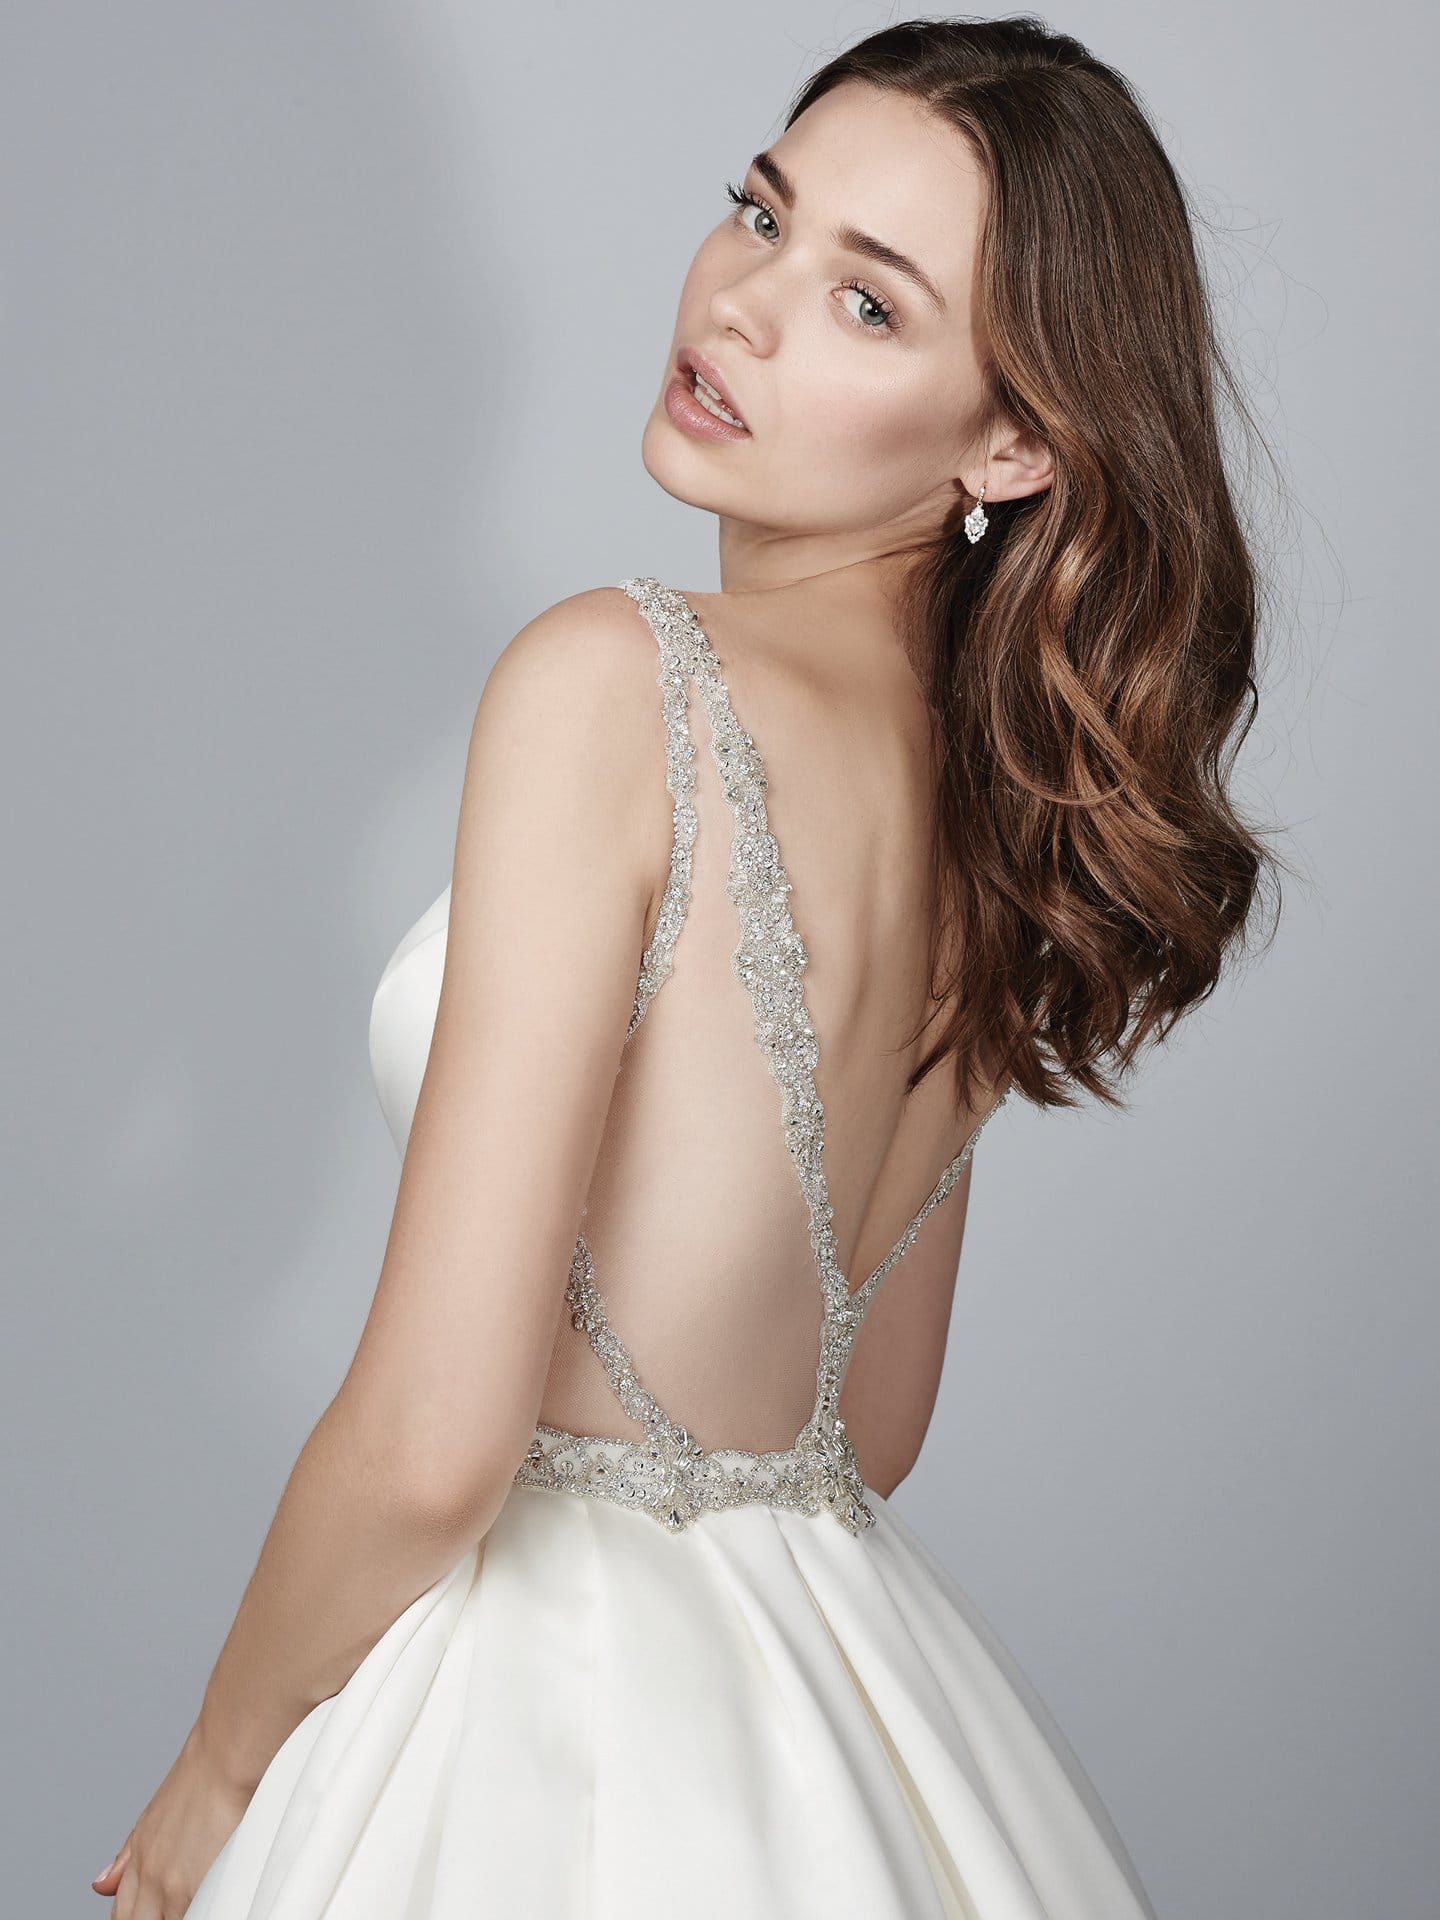 Beautiful statement-back wedding dresses from Maggie Sottero and Sottero and Midgley - Kiandra wedding dress with Jersey lining for a luxe, breezy and figure-flattering fit.